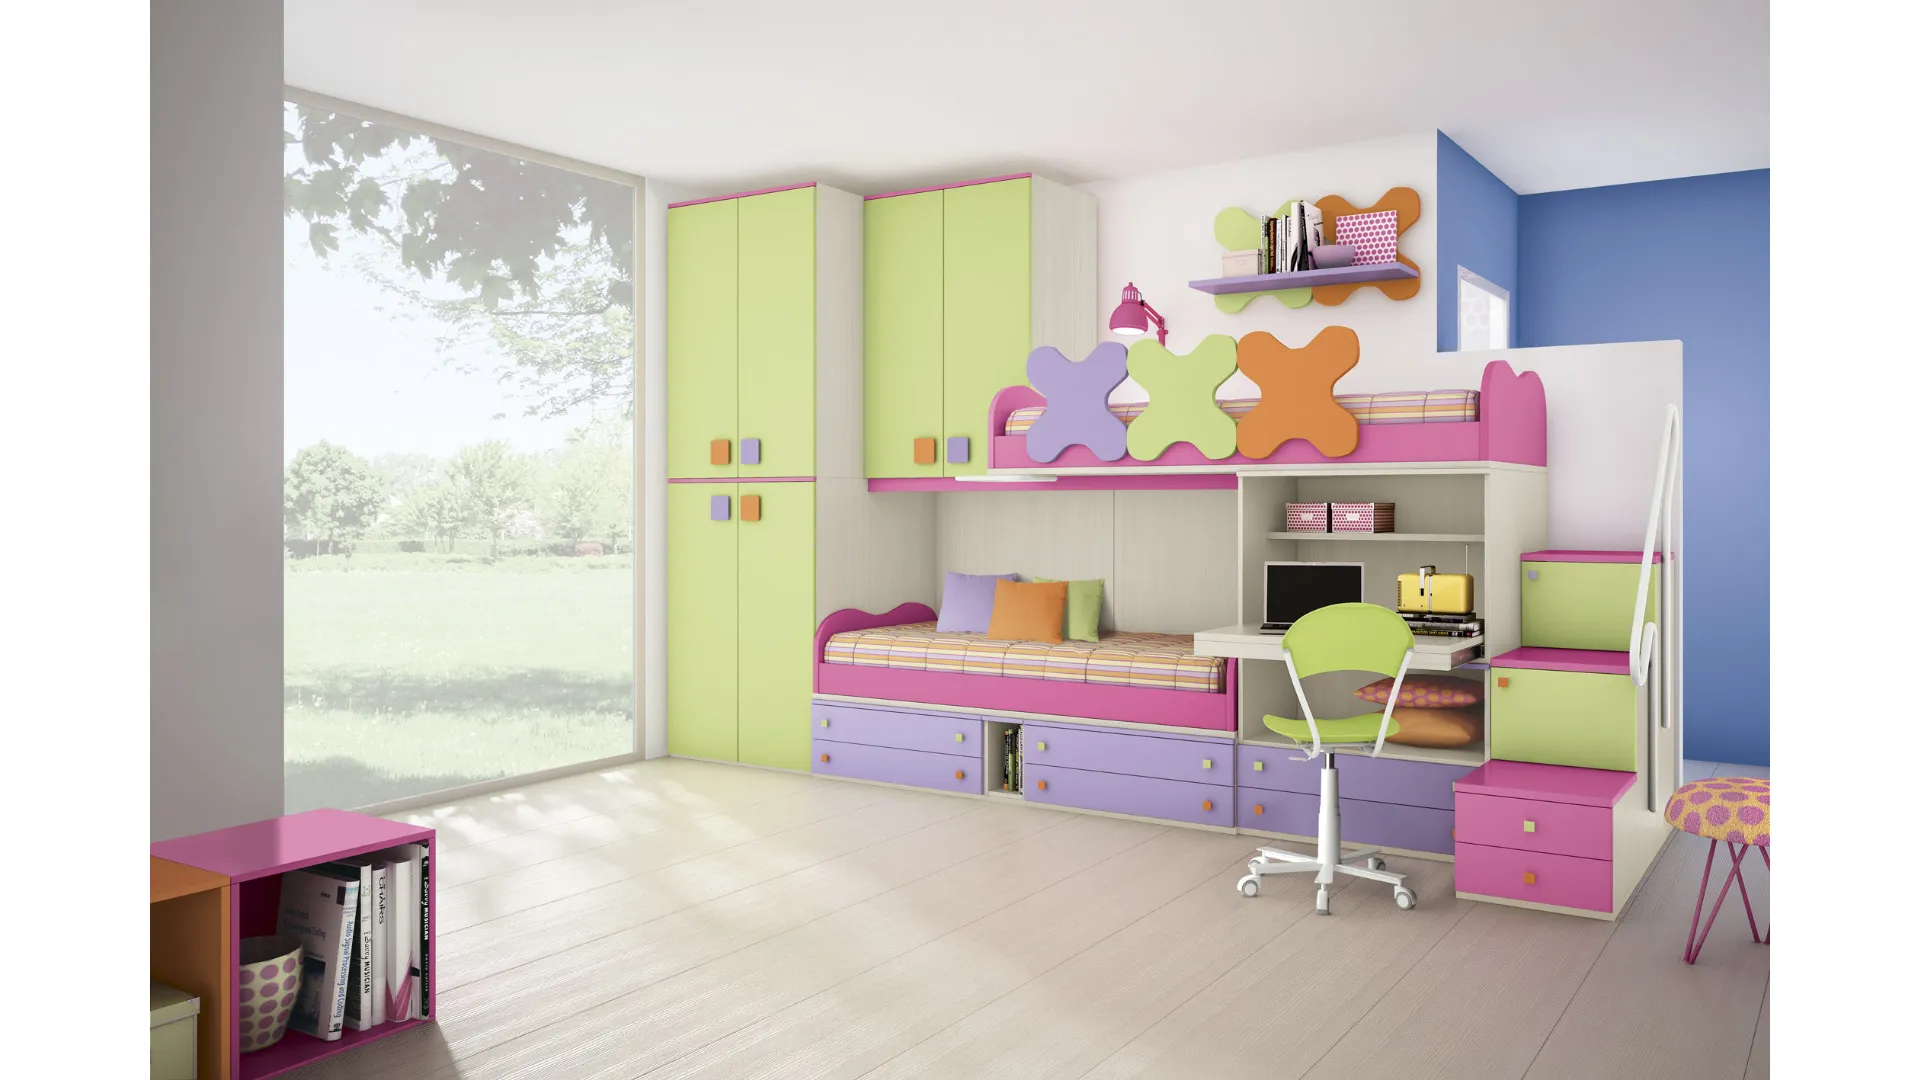 Space-saving colored bedroom